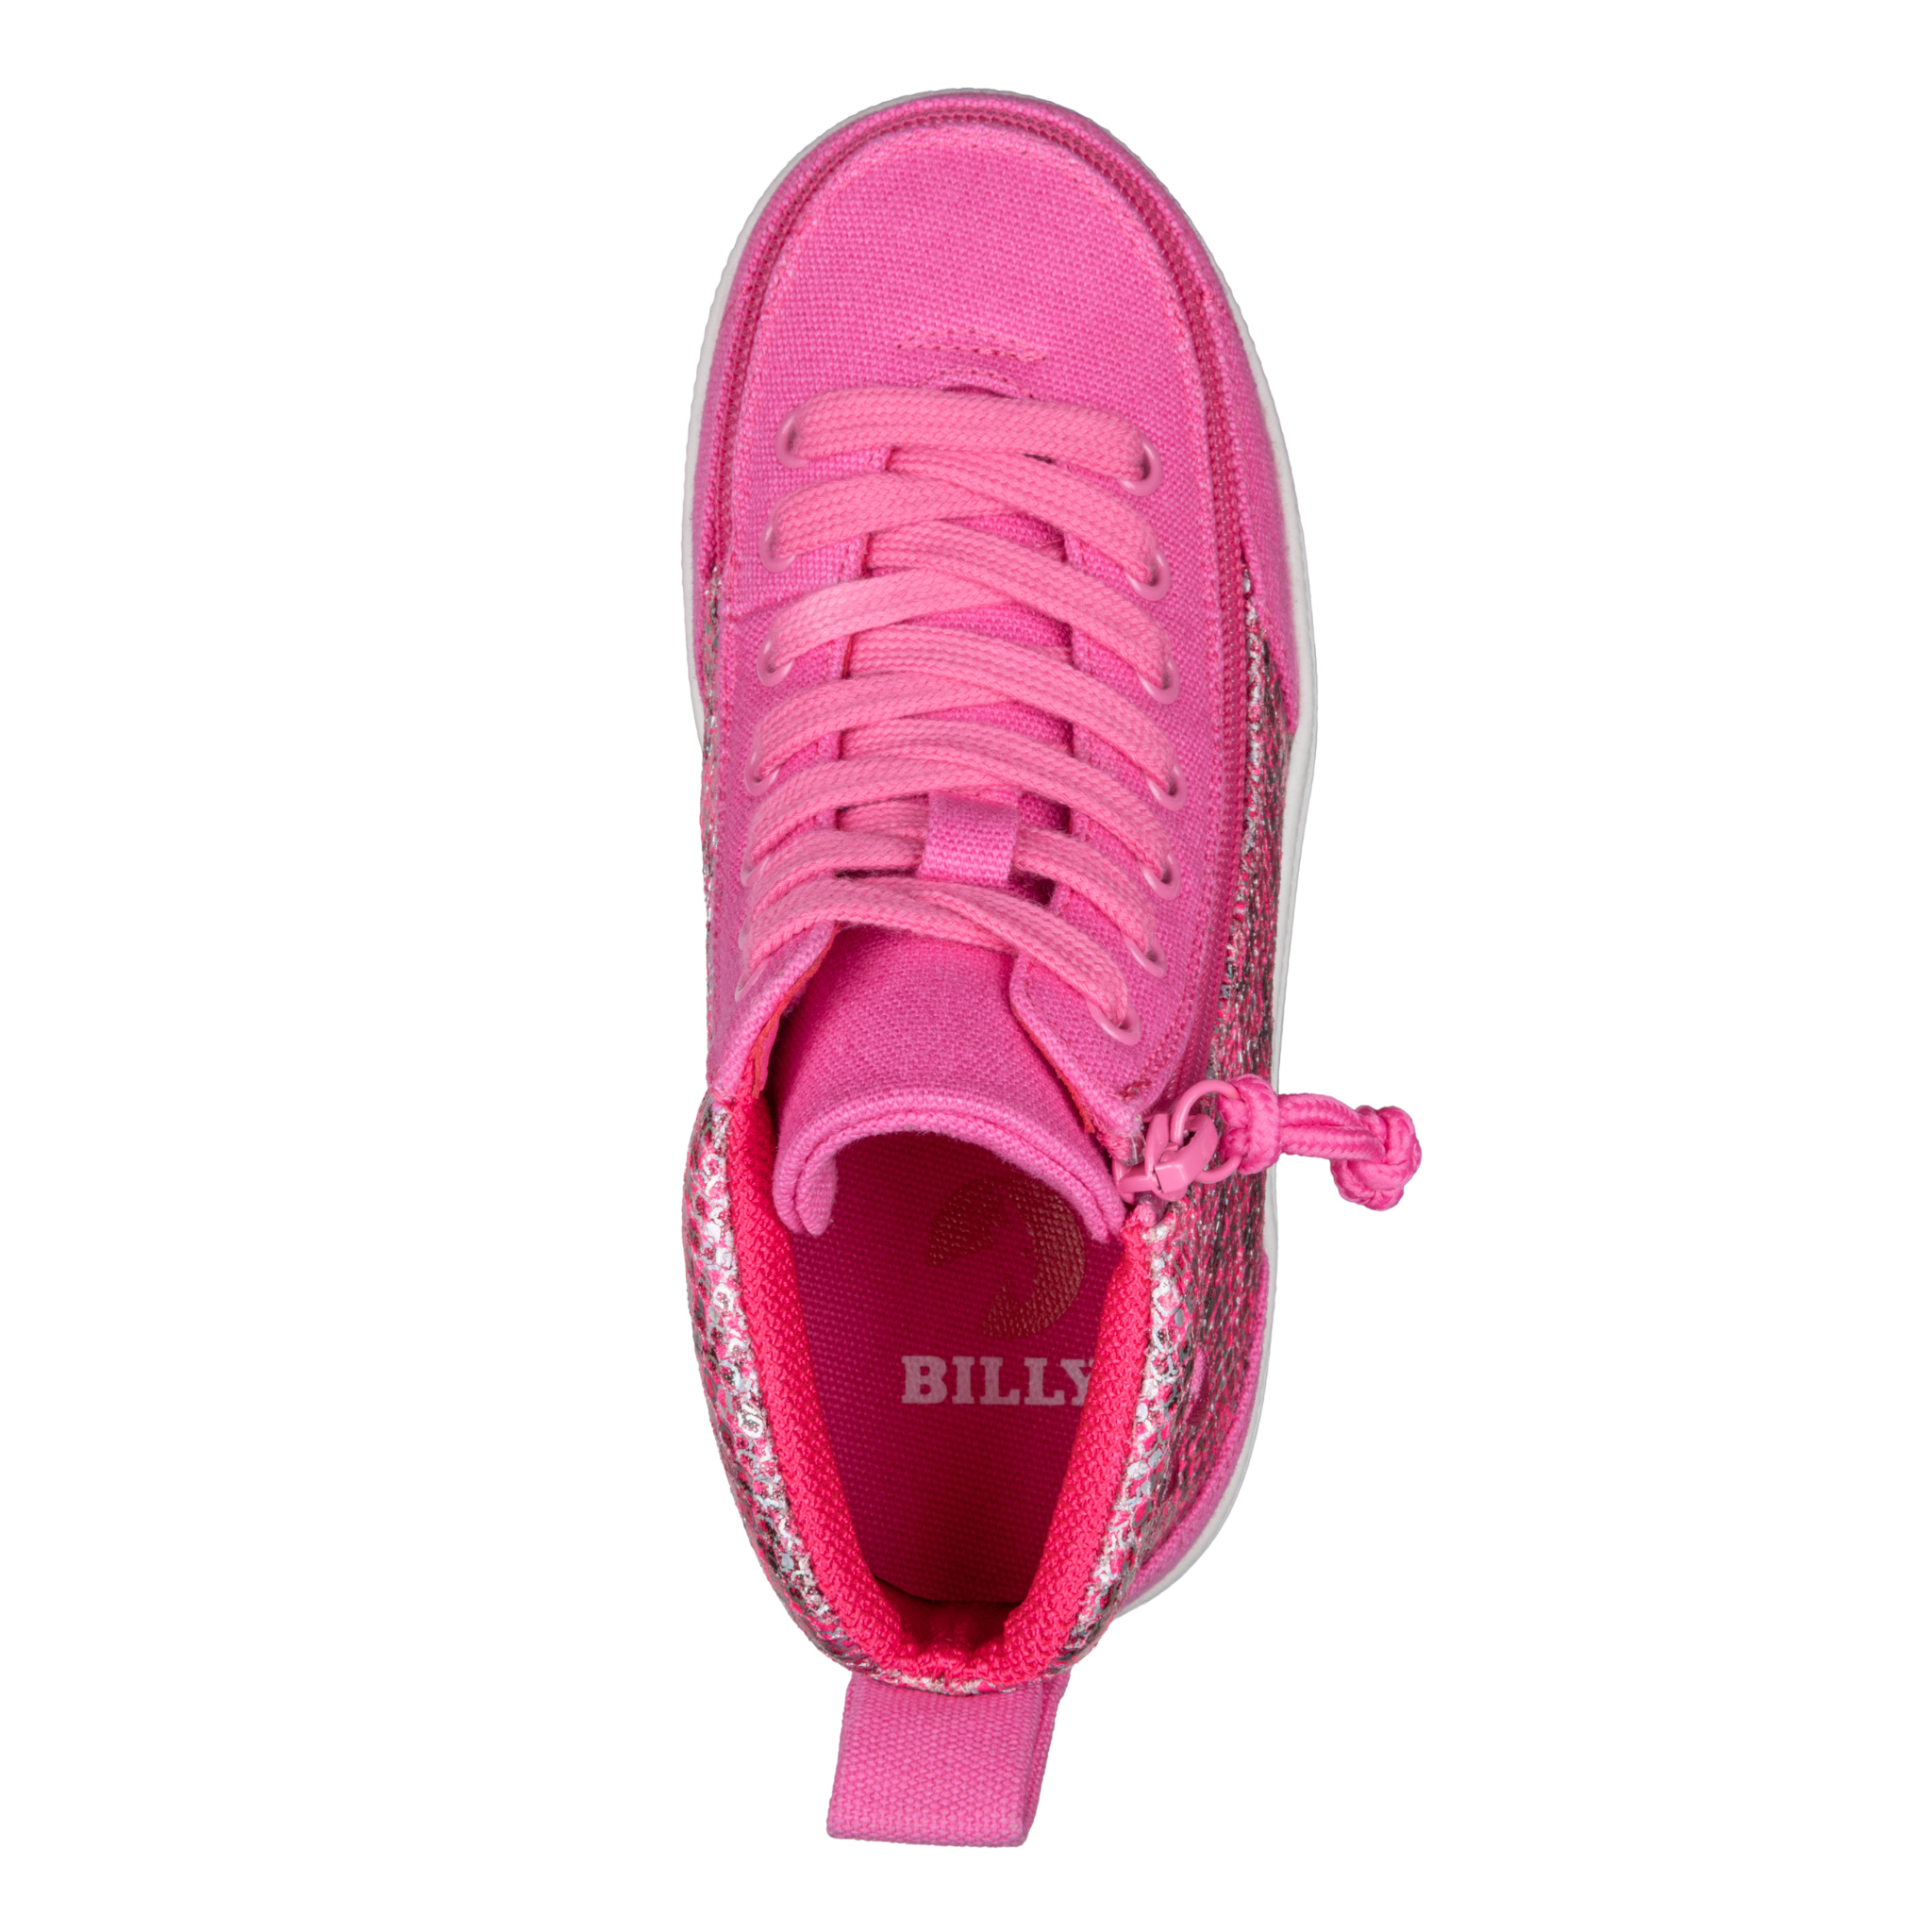 Billy Footwear (Toddlers)  DR Fit - High Top DR Fuchsia Snake Canvas Shoes